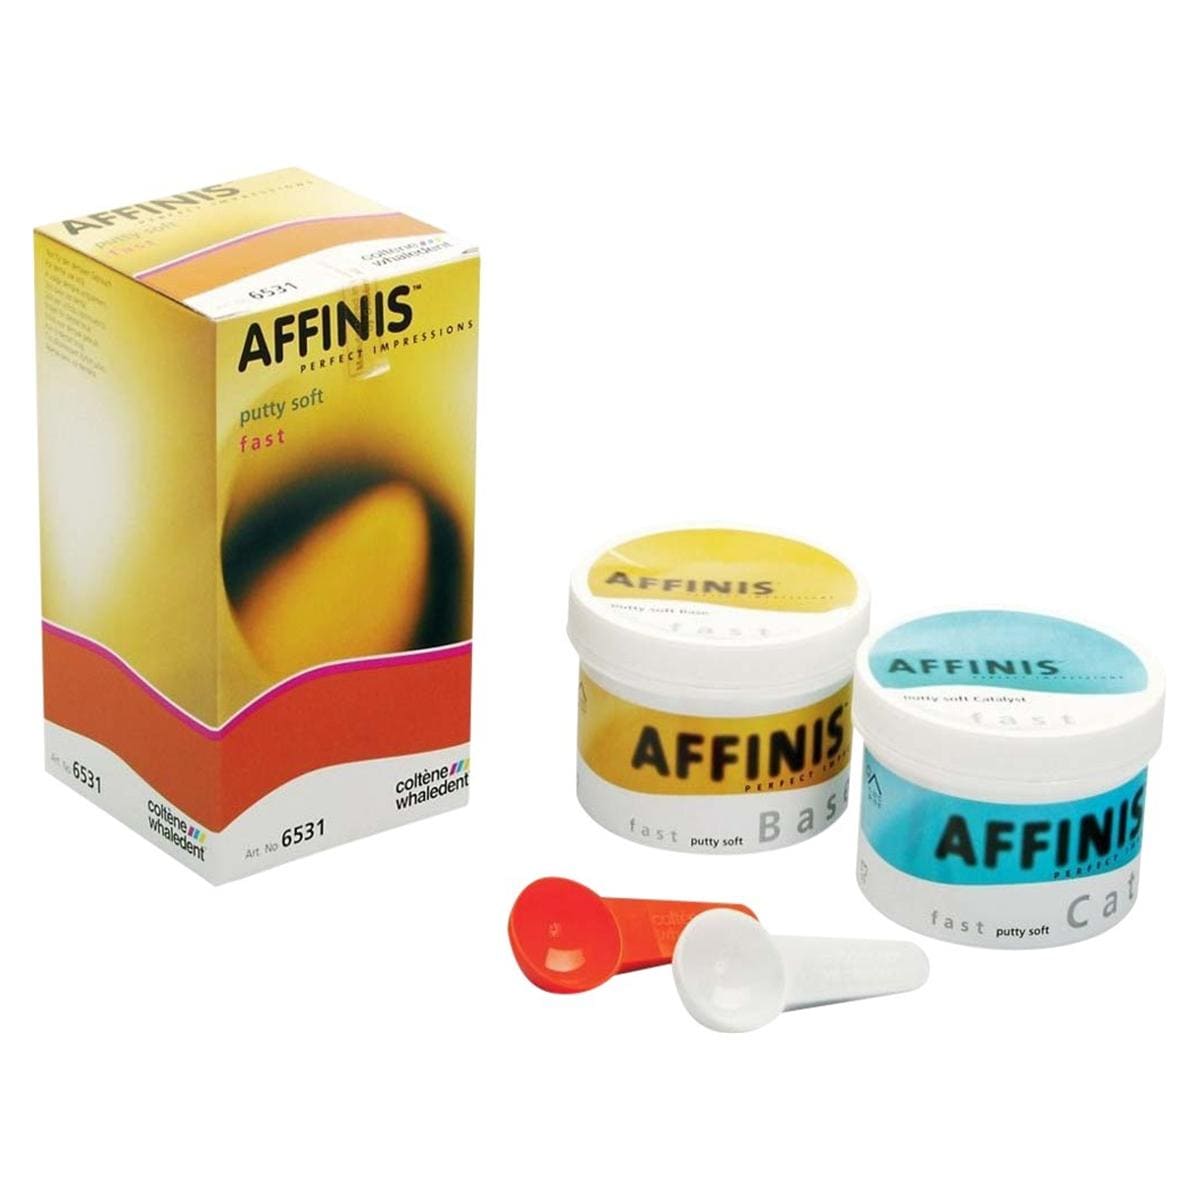 Affinis Putty - Soft fast